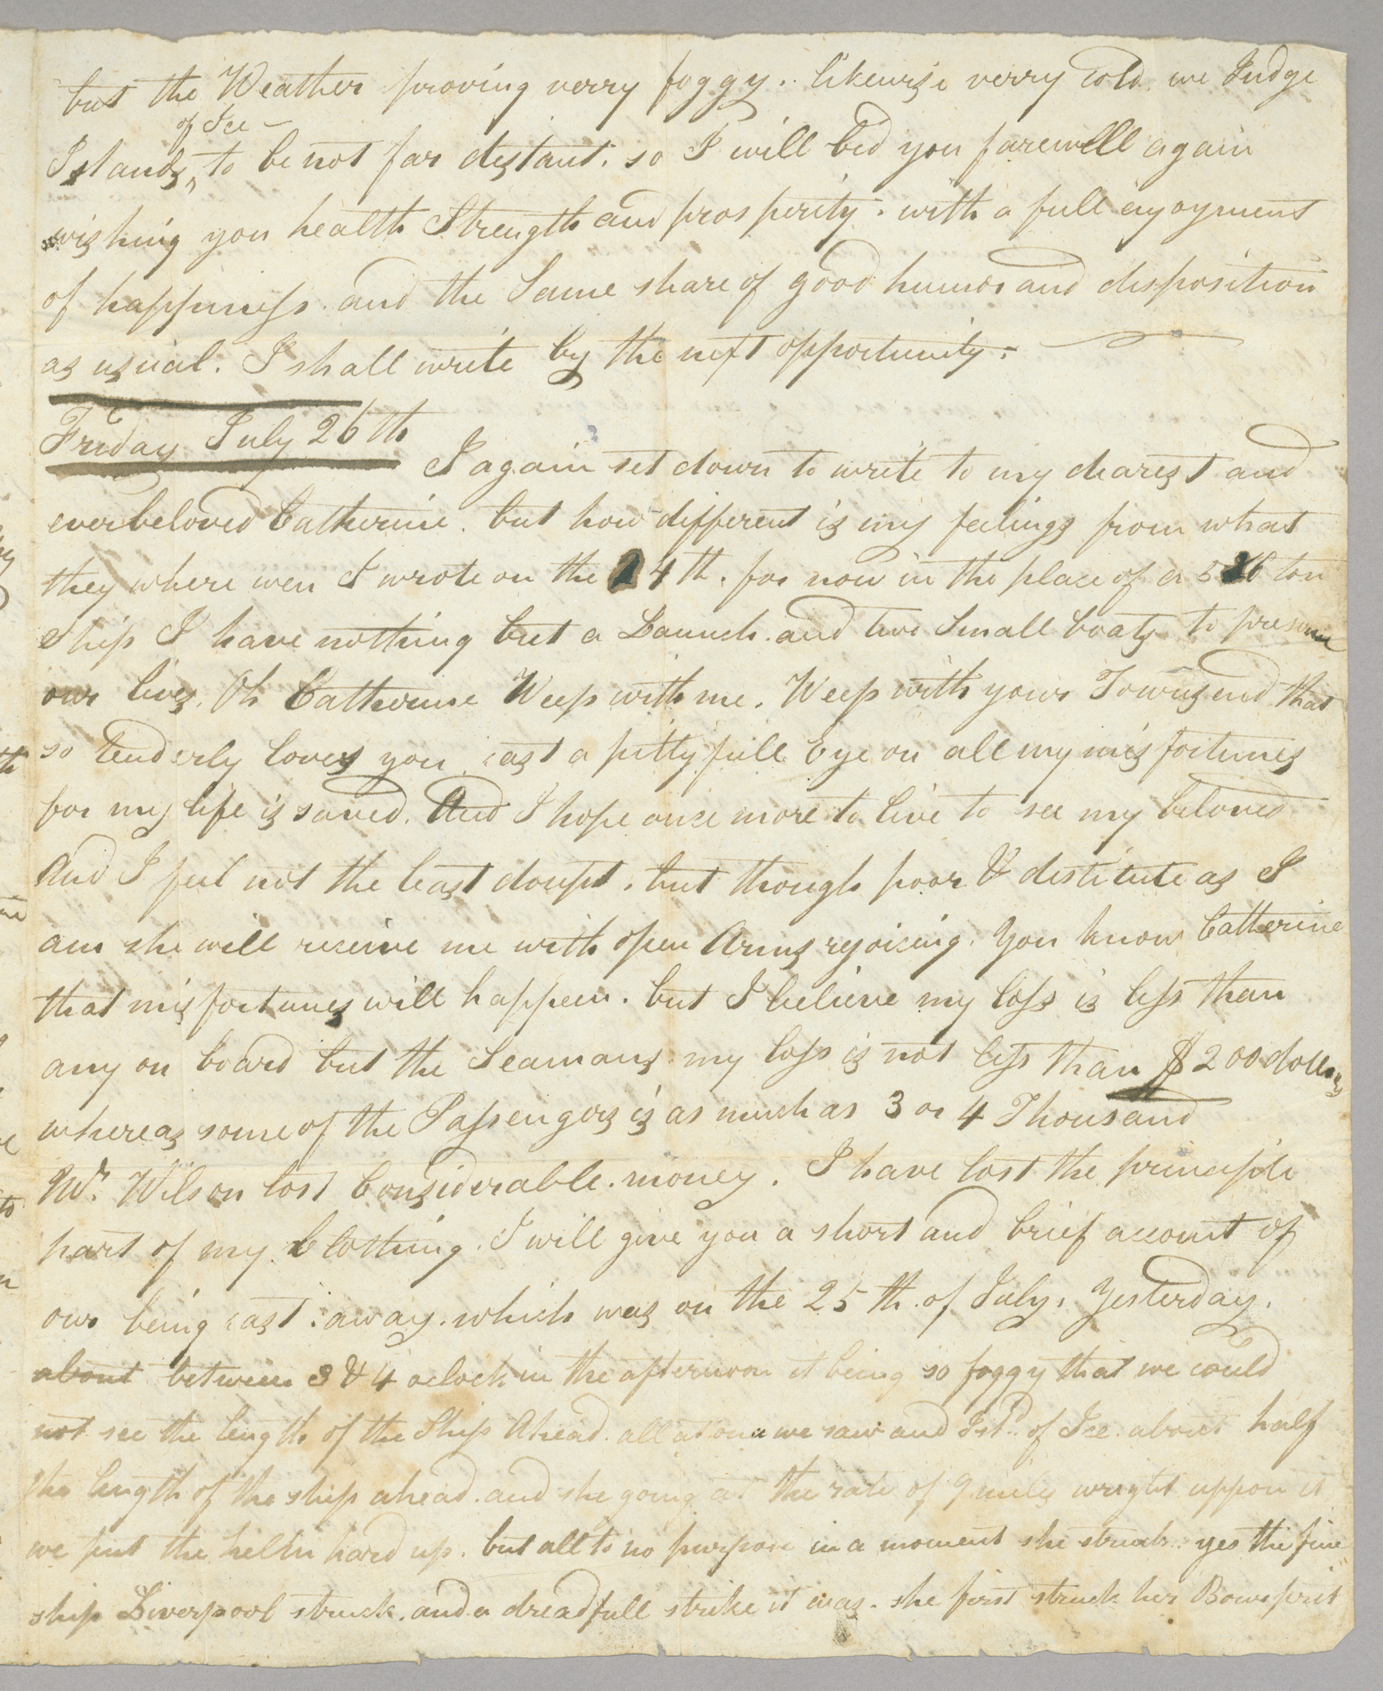 Letter, [Hewlett Townsend Coles], at sea, to "My Dear Beloved Catherine," [Catherine Van Suydam Coles], n.p., Page 3